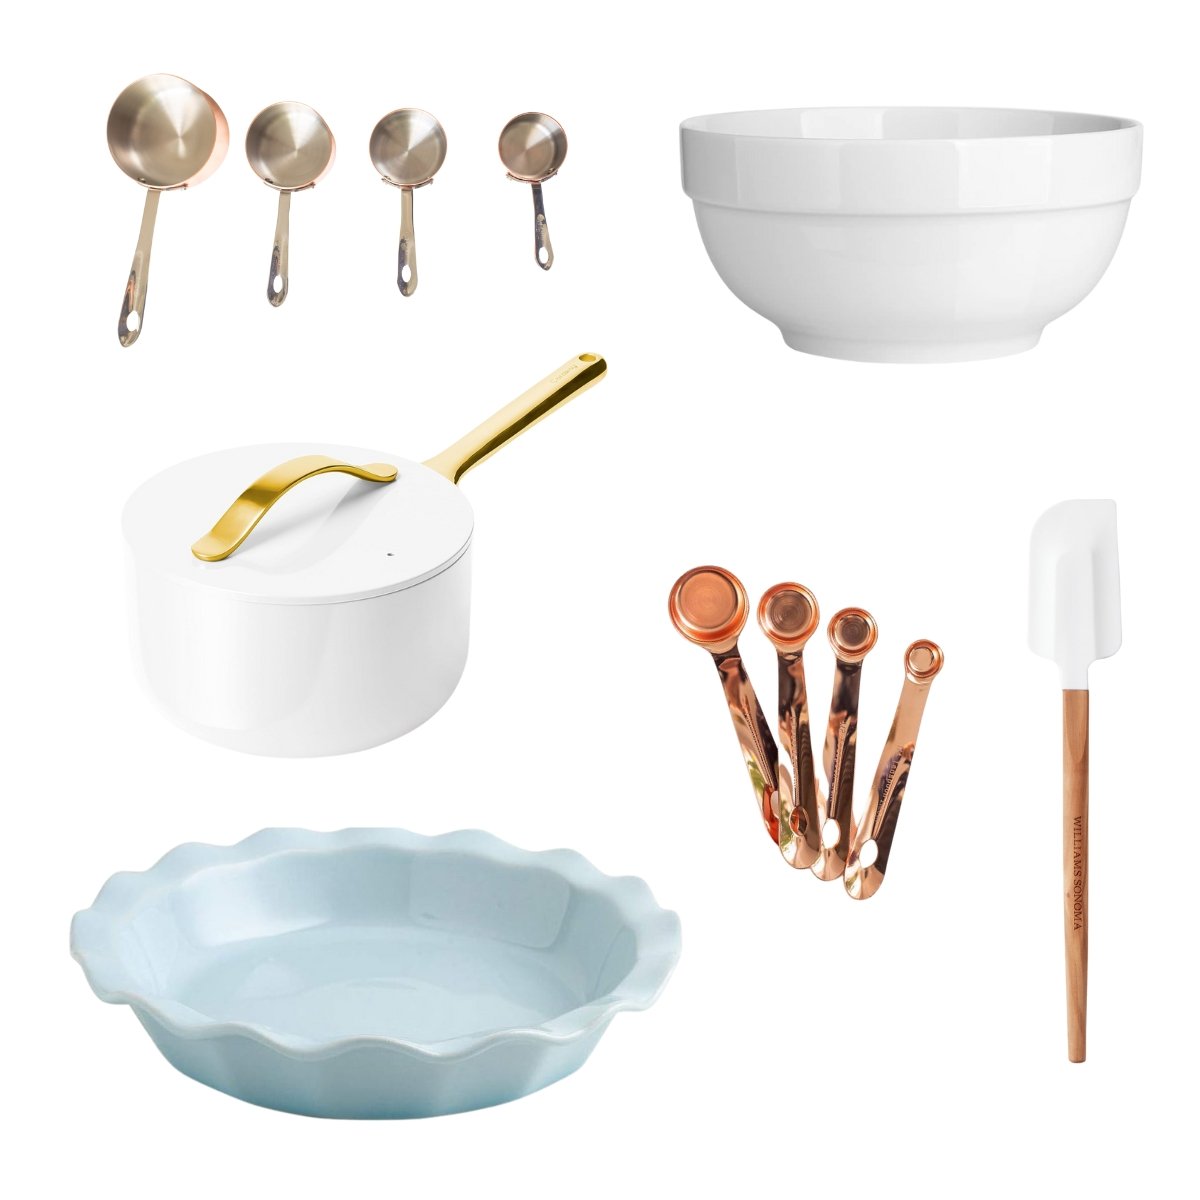 A collection of caramel pecan pie bowls and spoons.